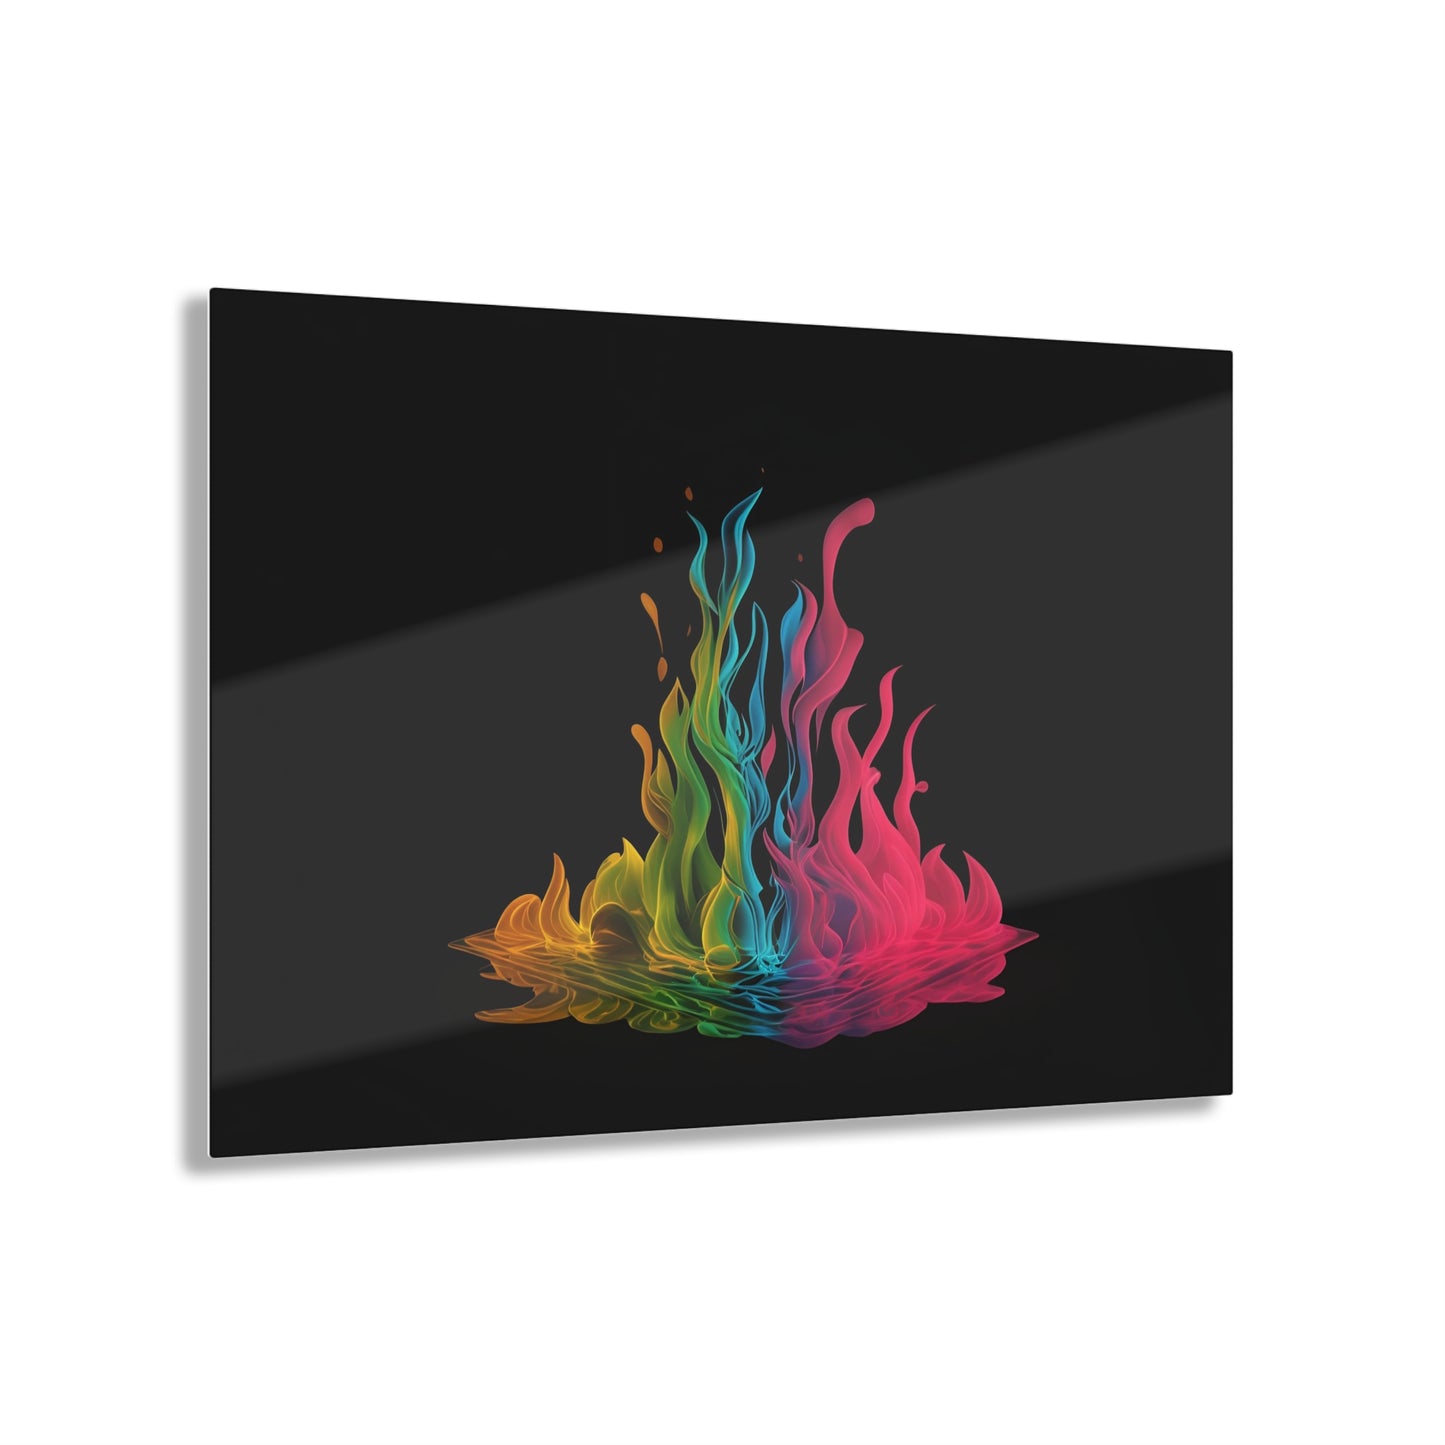 Abstracts Art on Jet Black Acrylic Panels for gameroom art gay gift for lgbtq lovers ally femme style art horizontal orientaion v4